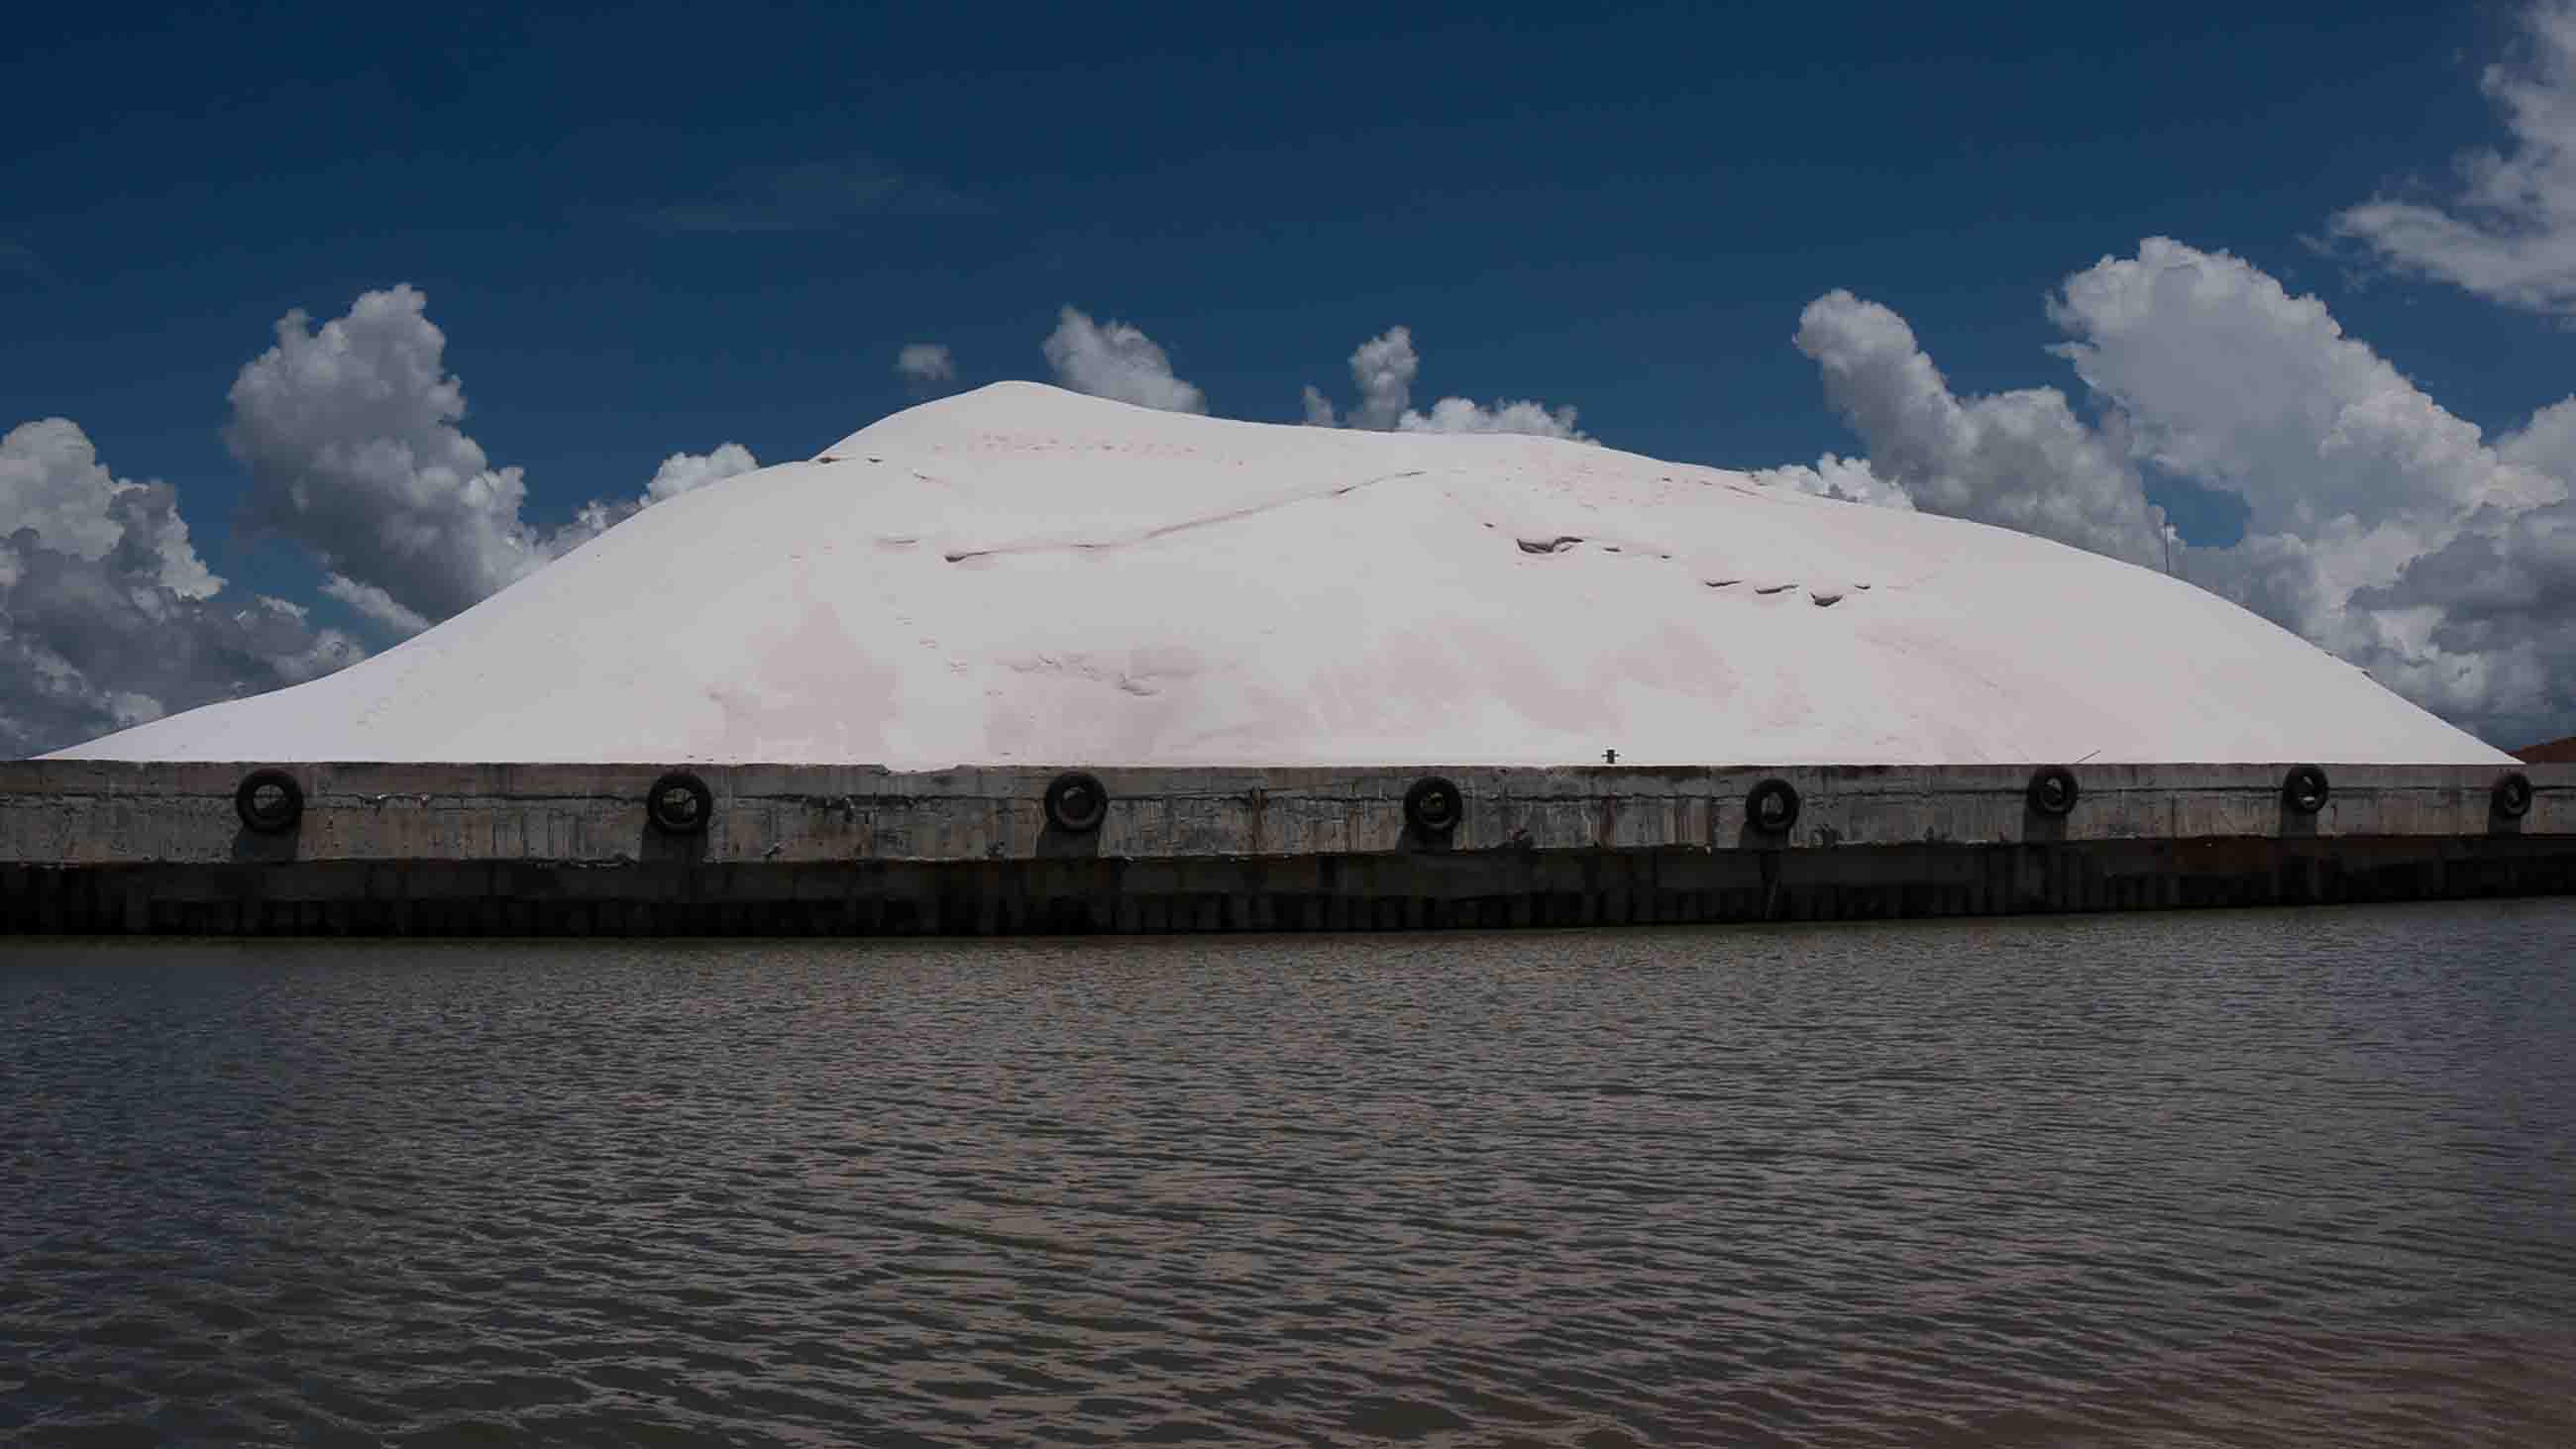 A giant pile of washed silica sand in Koh Kong province, Cambodia.